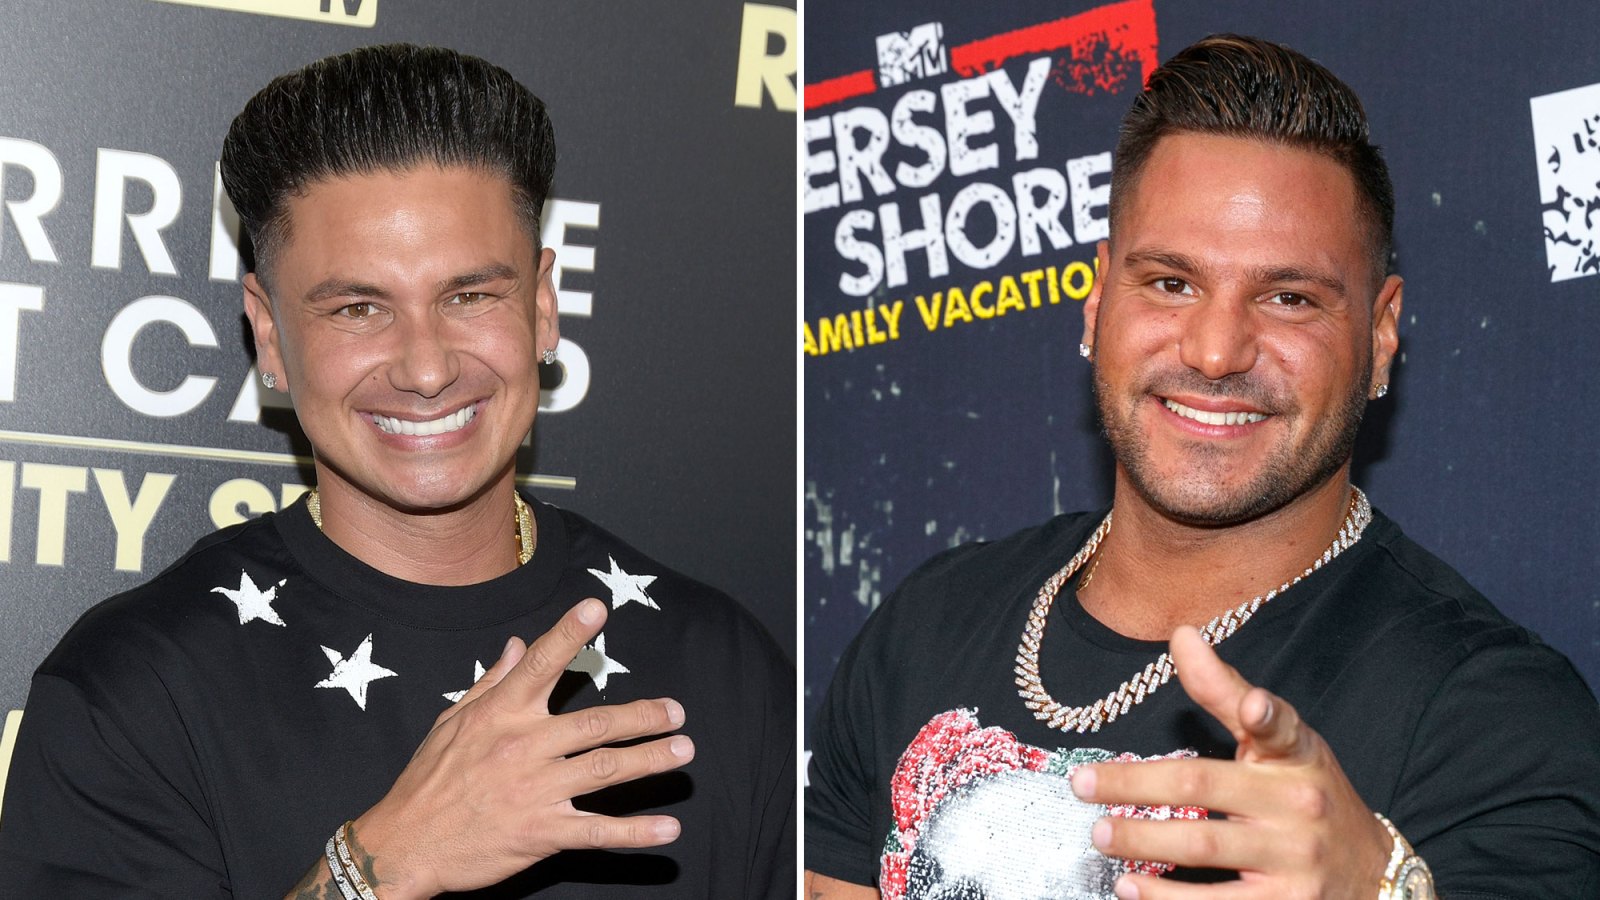 Pauly D Ronnie Ortiz Magro Putting Daughter First Amid Drama